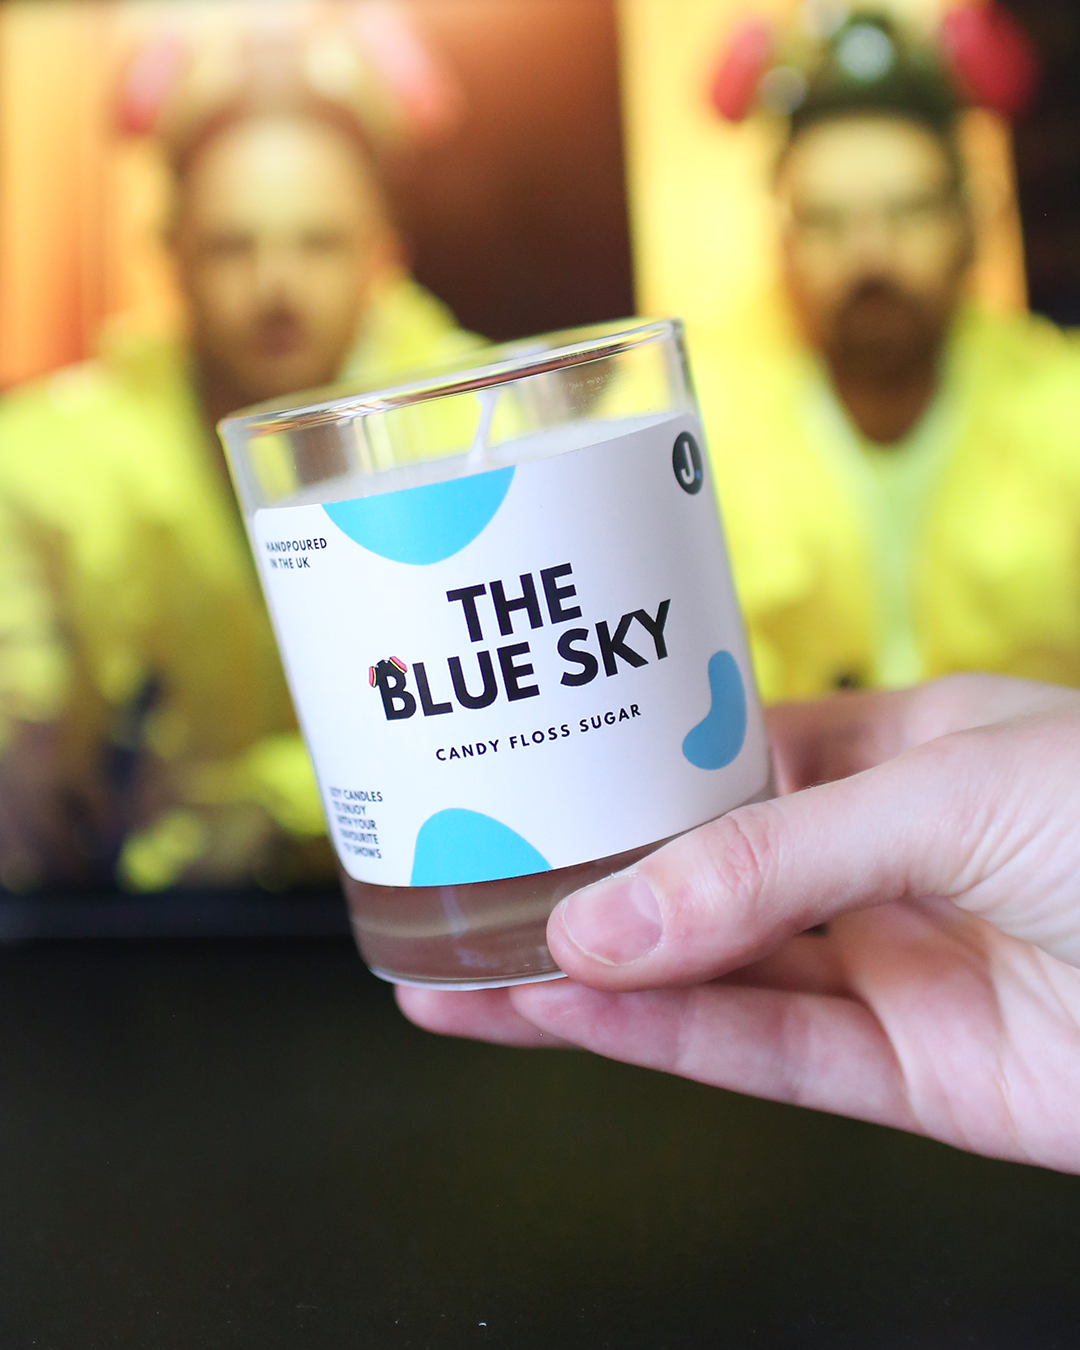 Breaking Bad Candle - The Blue Sky Candle (Blue Candy Floss) Inspired By Breaking Bad's Blue Sky Meth